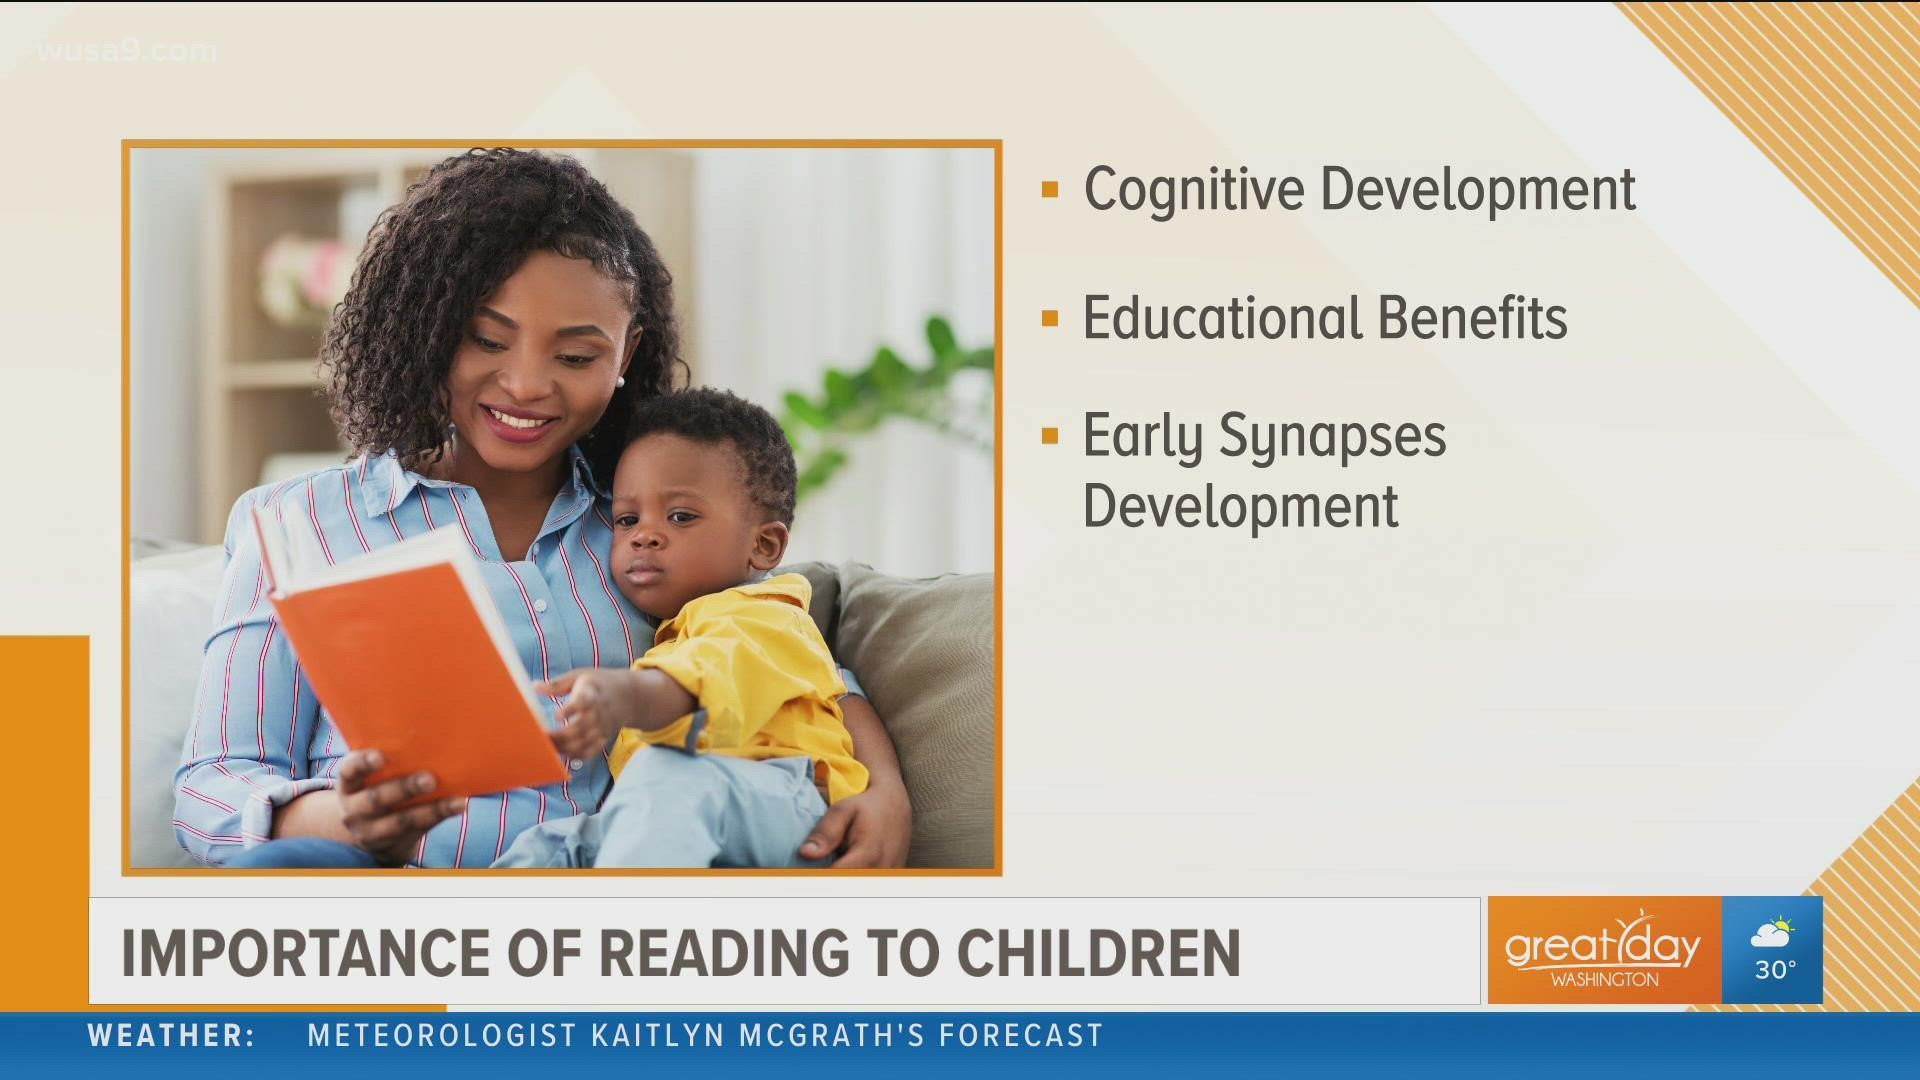 Author of the Doctoroo Series, Dr. Rachel Wellner shares tips on reading with your children for National Reading Month (March).